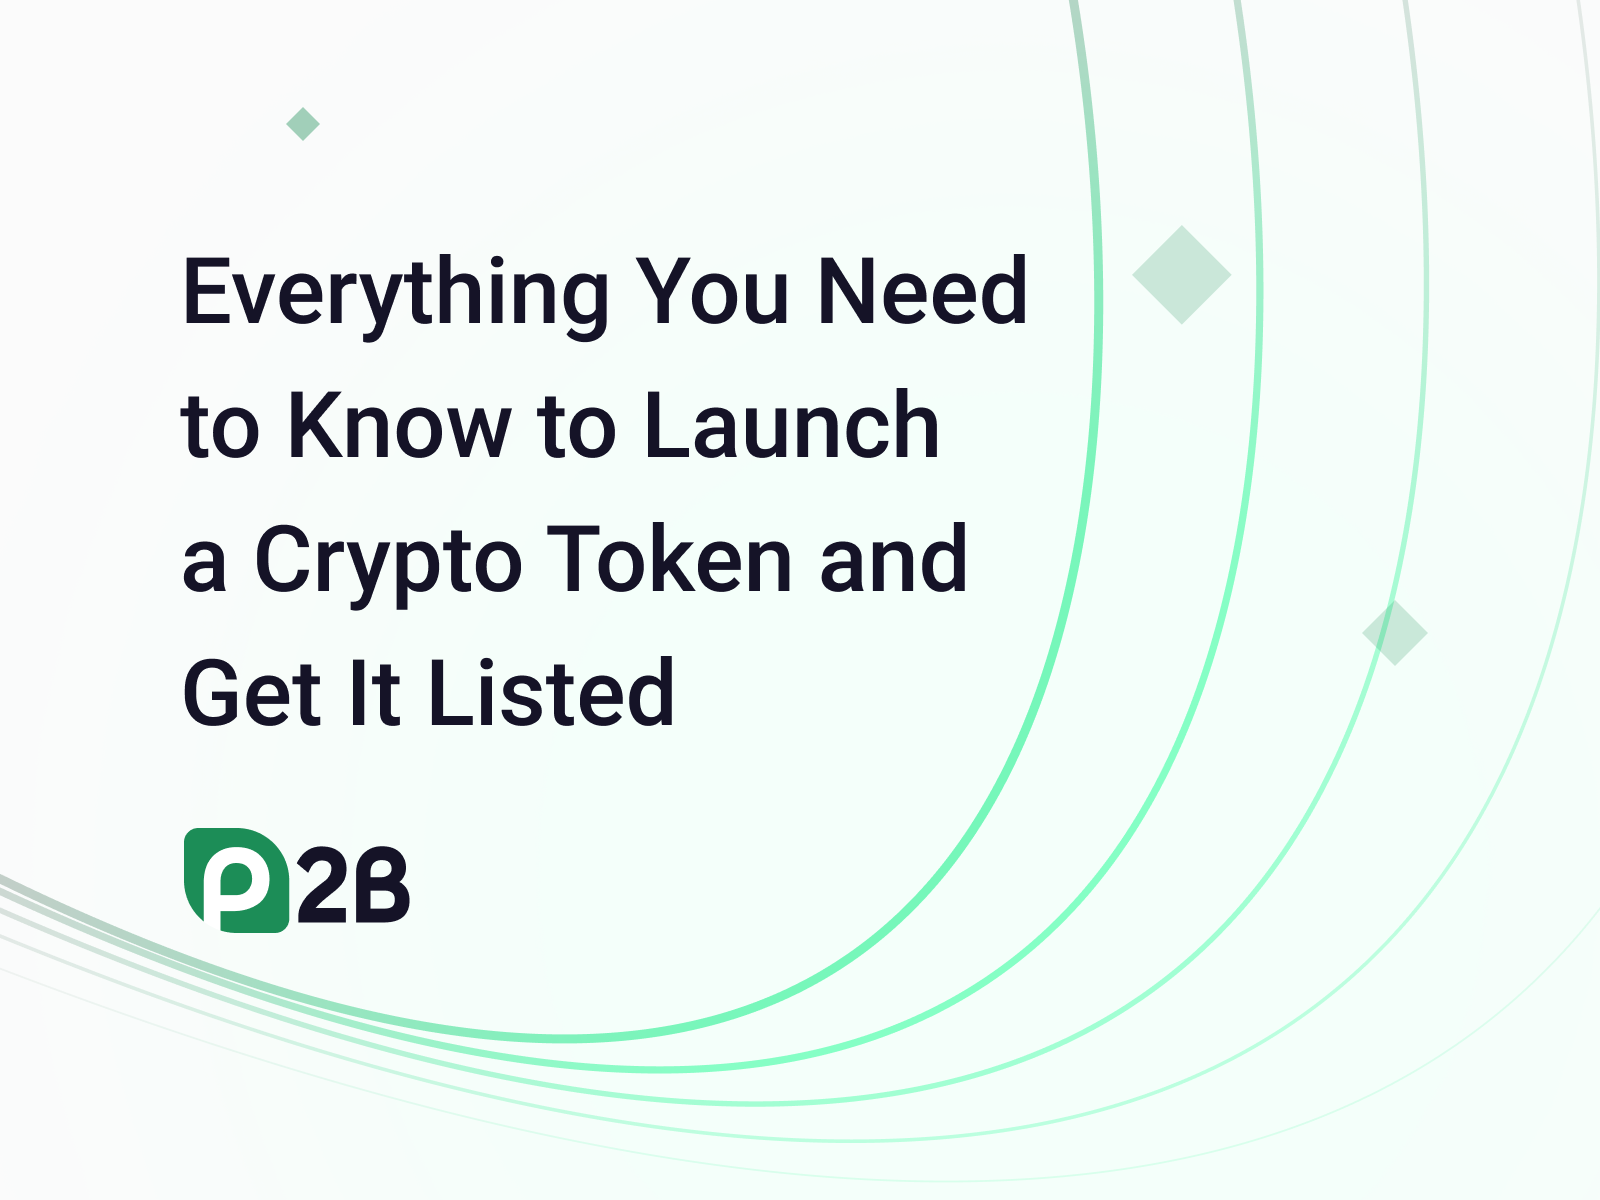 Launch a Crypto Token and Get It Listed